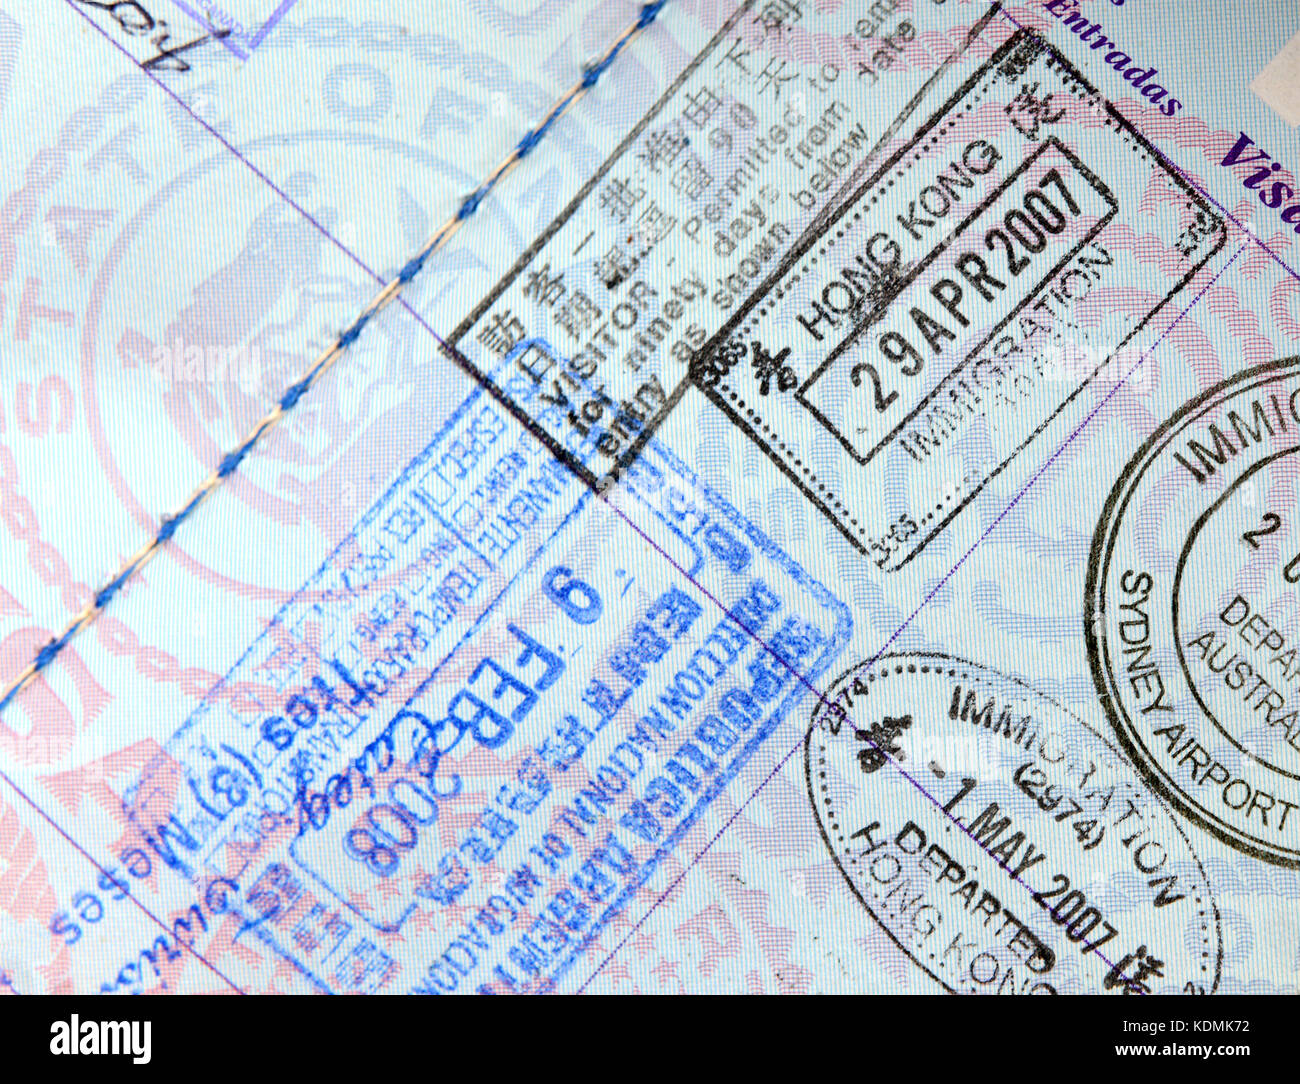 Closeup of Immigration stamps in Passport showing travel concept Stock Photo